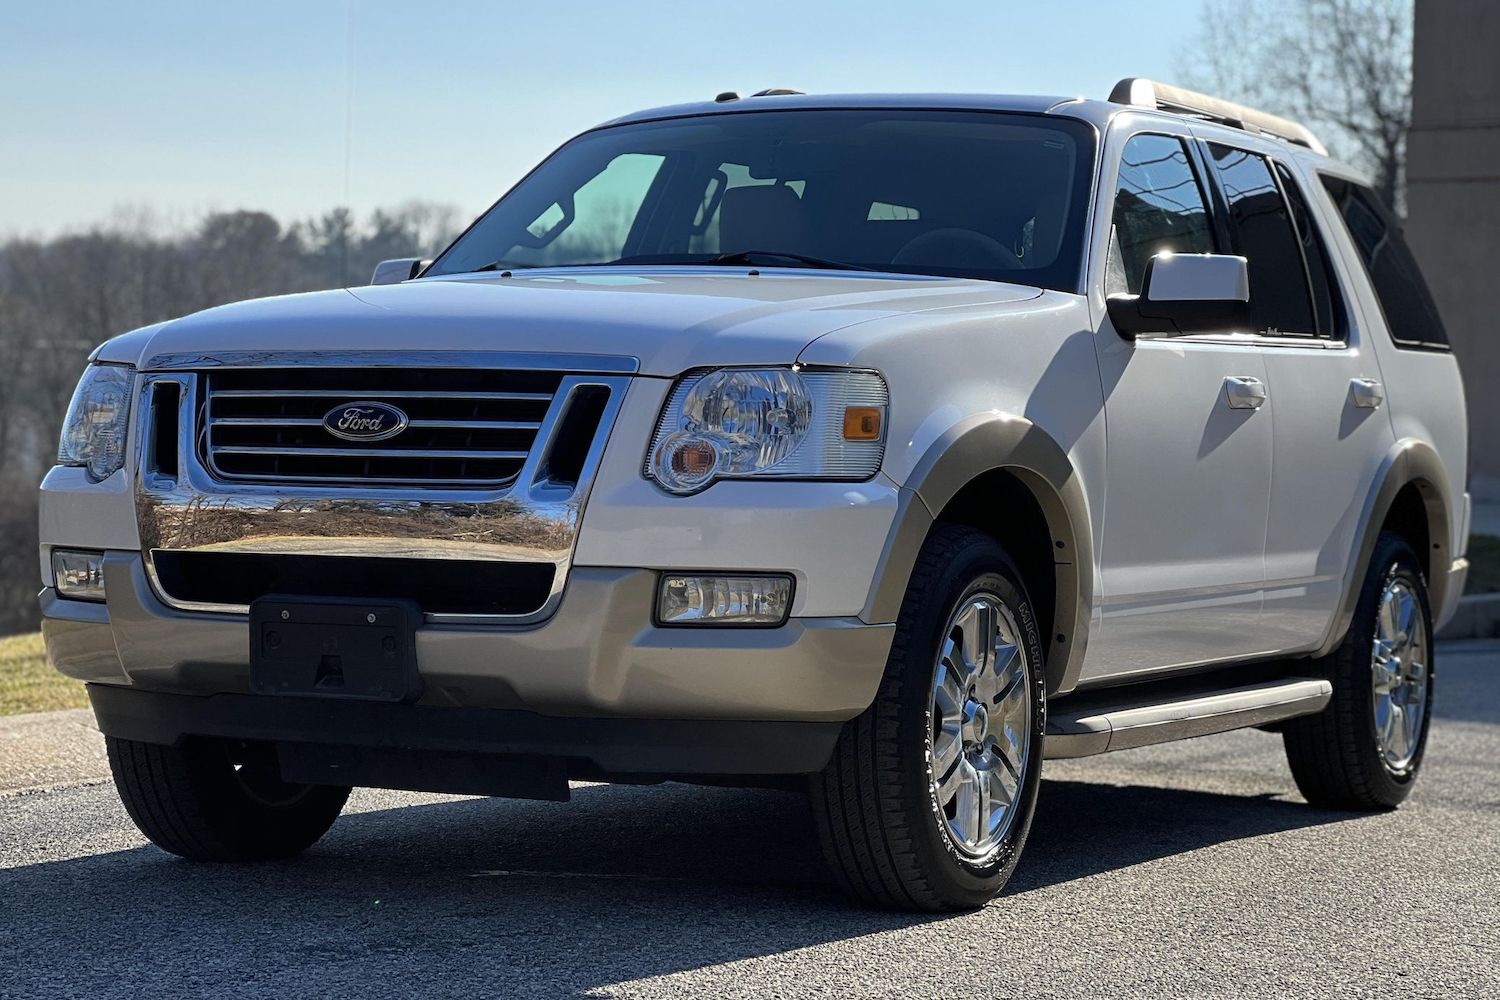 2010 Ford Explorer Eddie Bauer With 26K Miles Up For Auction